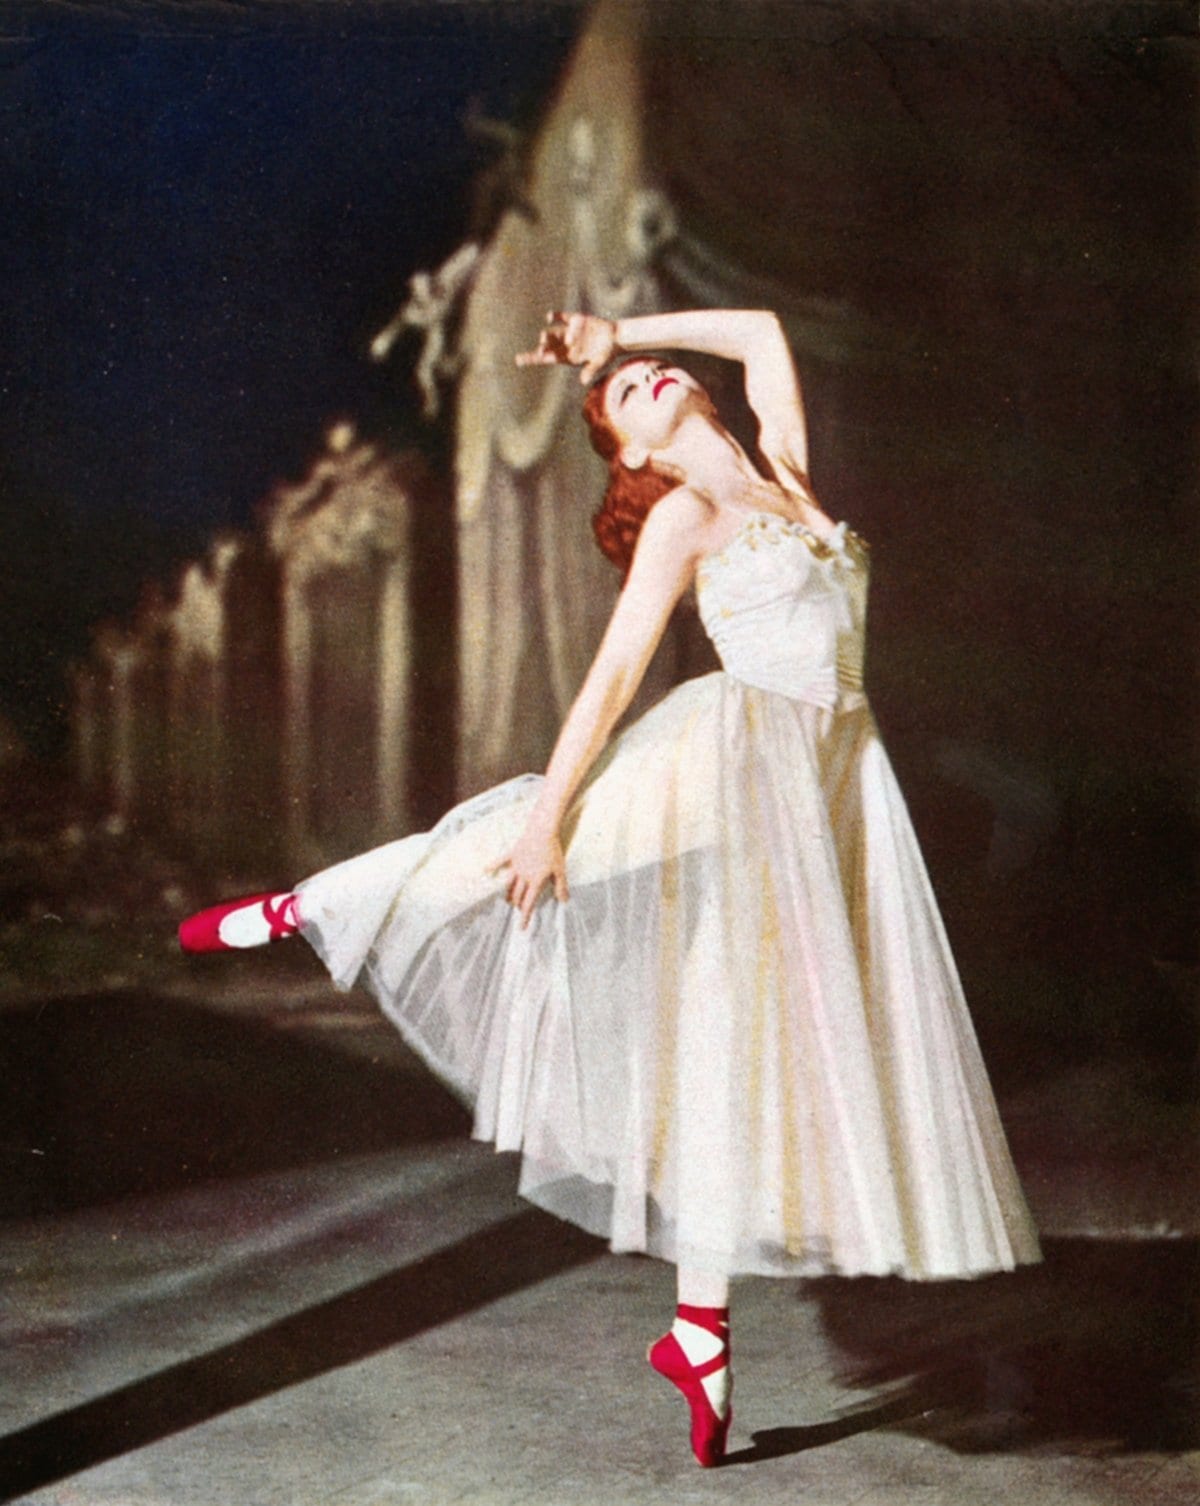 Moira Shearer as Victoria Page in the 1948 British drama film The Red Shoes